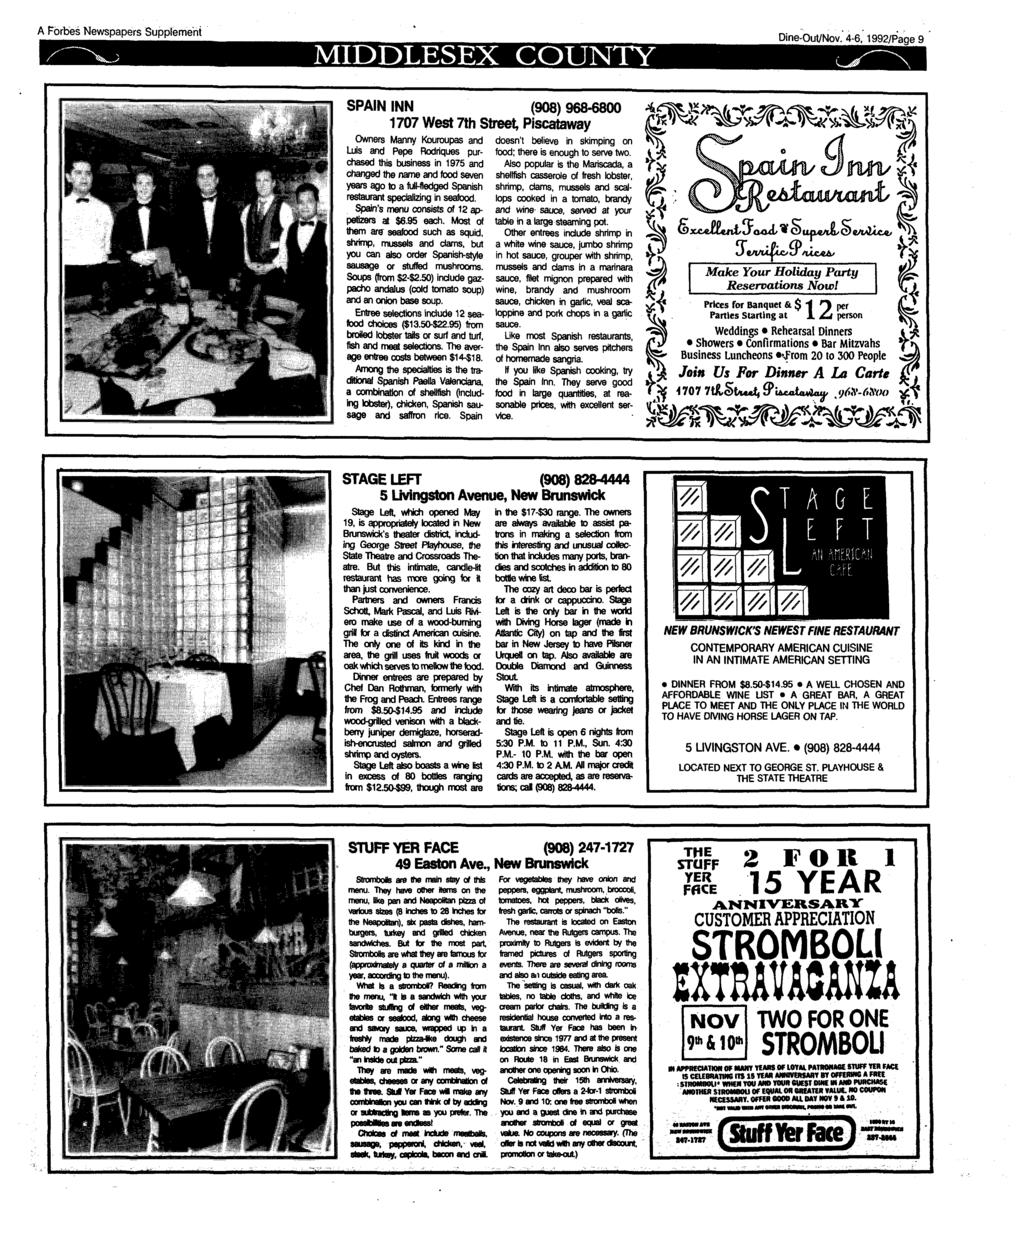 A Forbes Newspapers Supplement MIDDLESEX COUNTY Dine-Out/Nov.